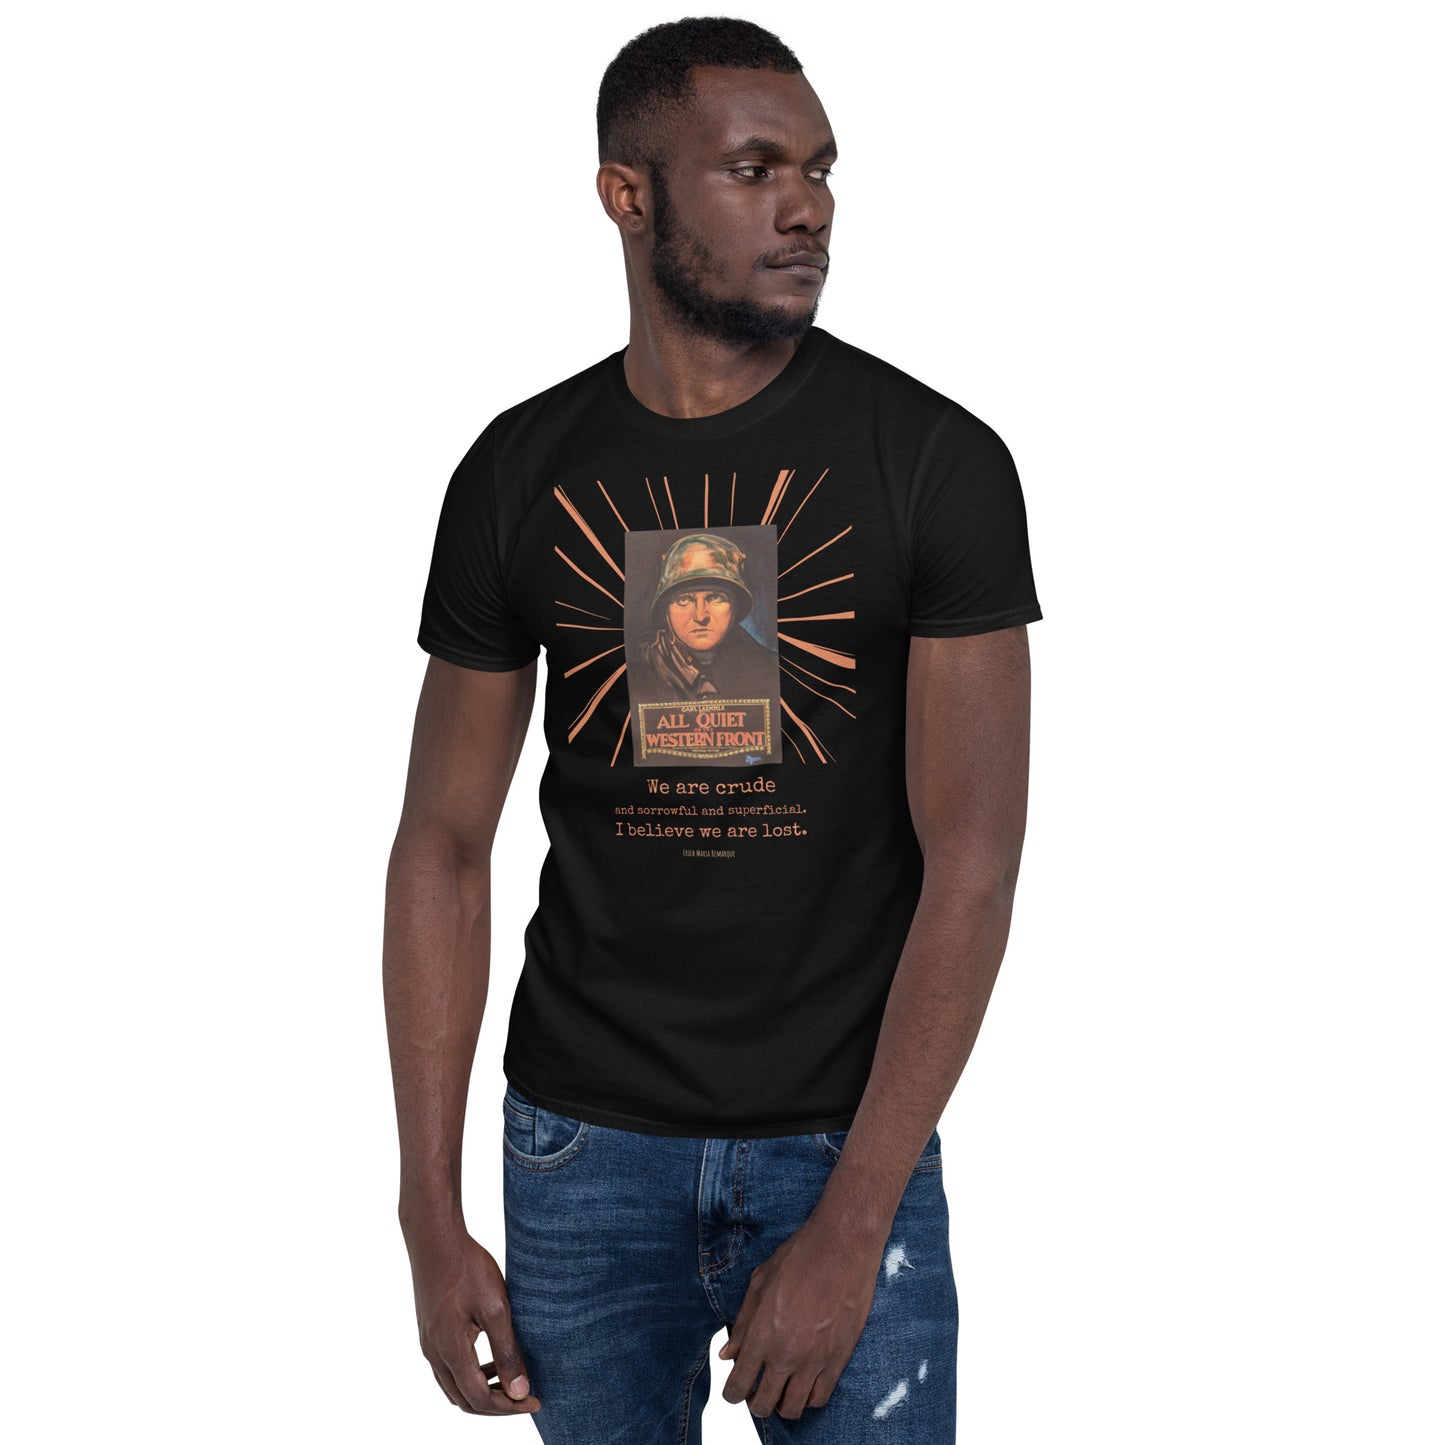 All Quiet on the Western Front Short-Sleeve Unisex T-Shirt, 1930 Movie Poster, Erich Maria Remarque Quote